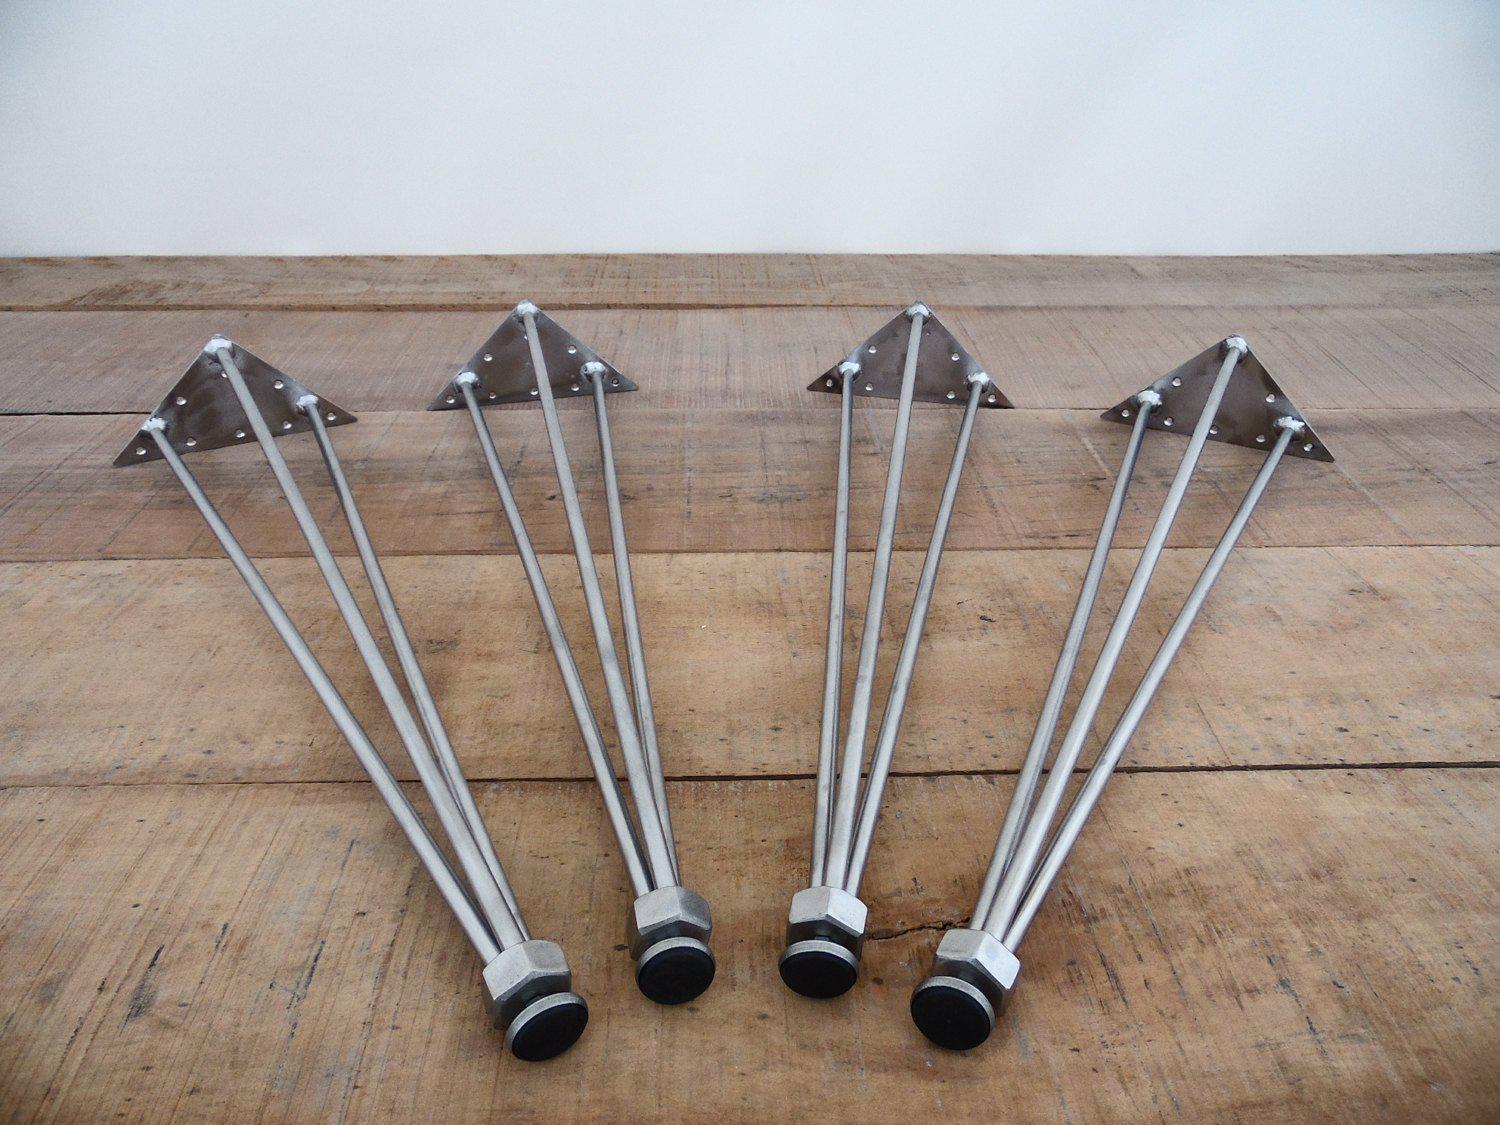 28" 3-pin-nuts Table Legs, Stainless Steel,height 26" To 32" Set(4)